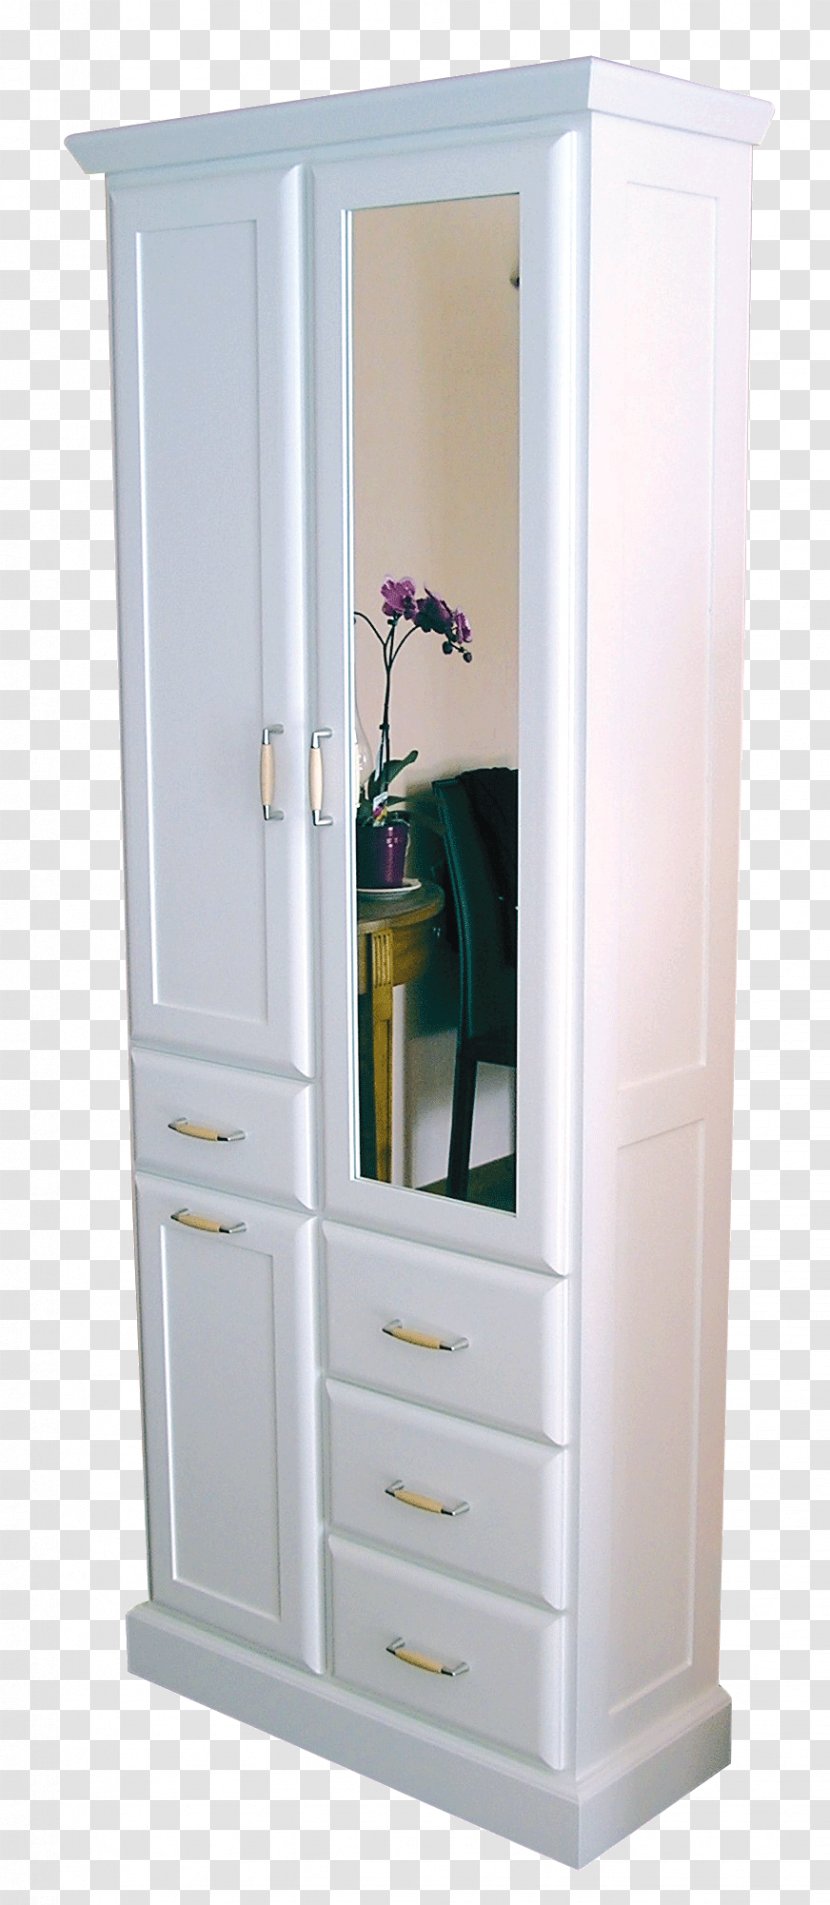 Armoires & Wardrobes Drawer Closet Product Design Chiffonier - Flower Transparent PNG